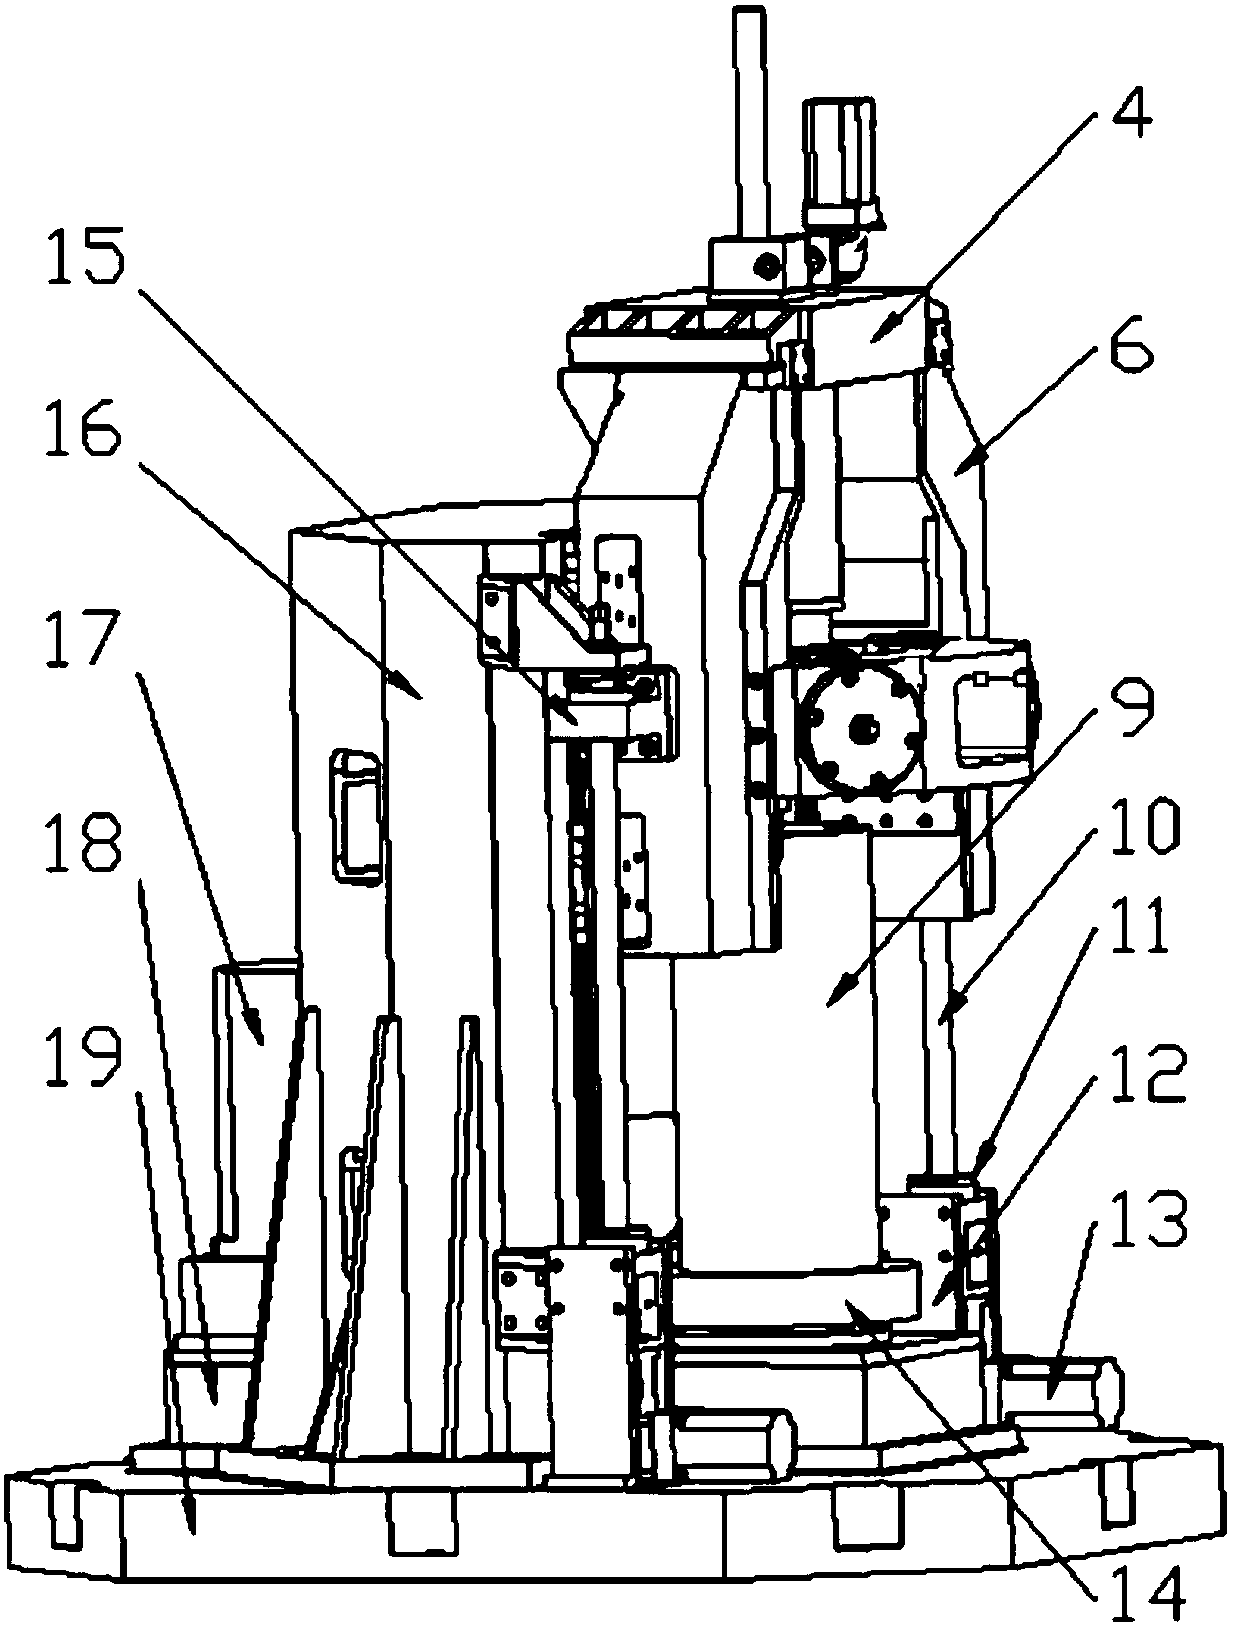 A Counter-wheel Spinning Device for Forming Cylindrical Parts with Different Diameters and Wall Thicknesses